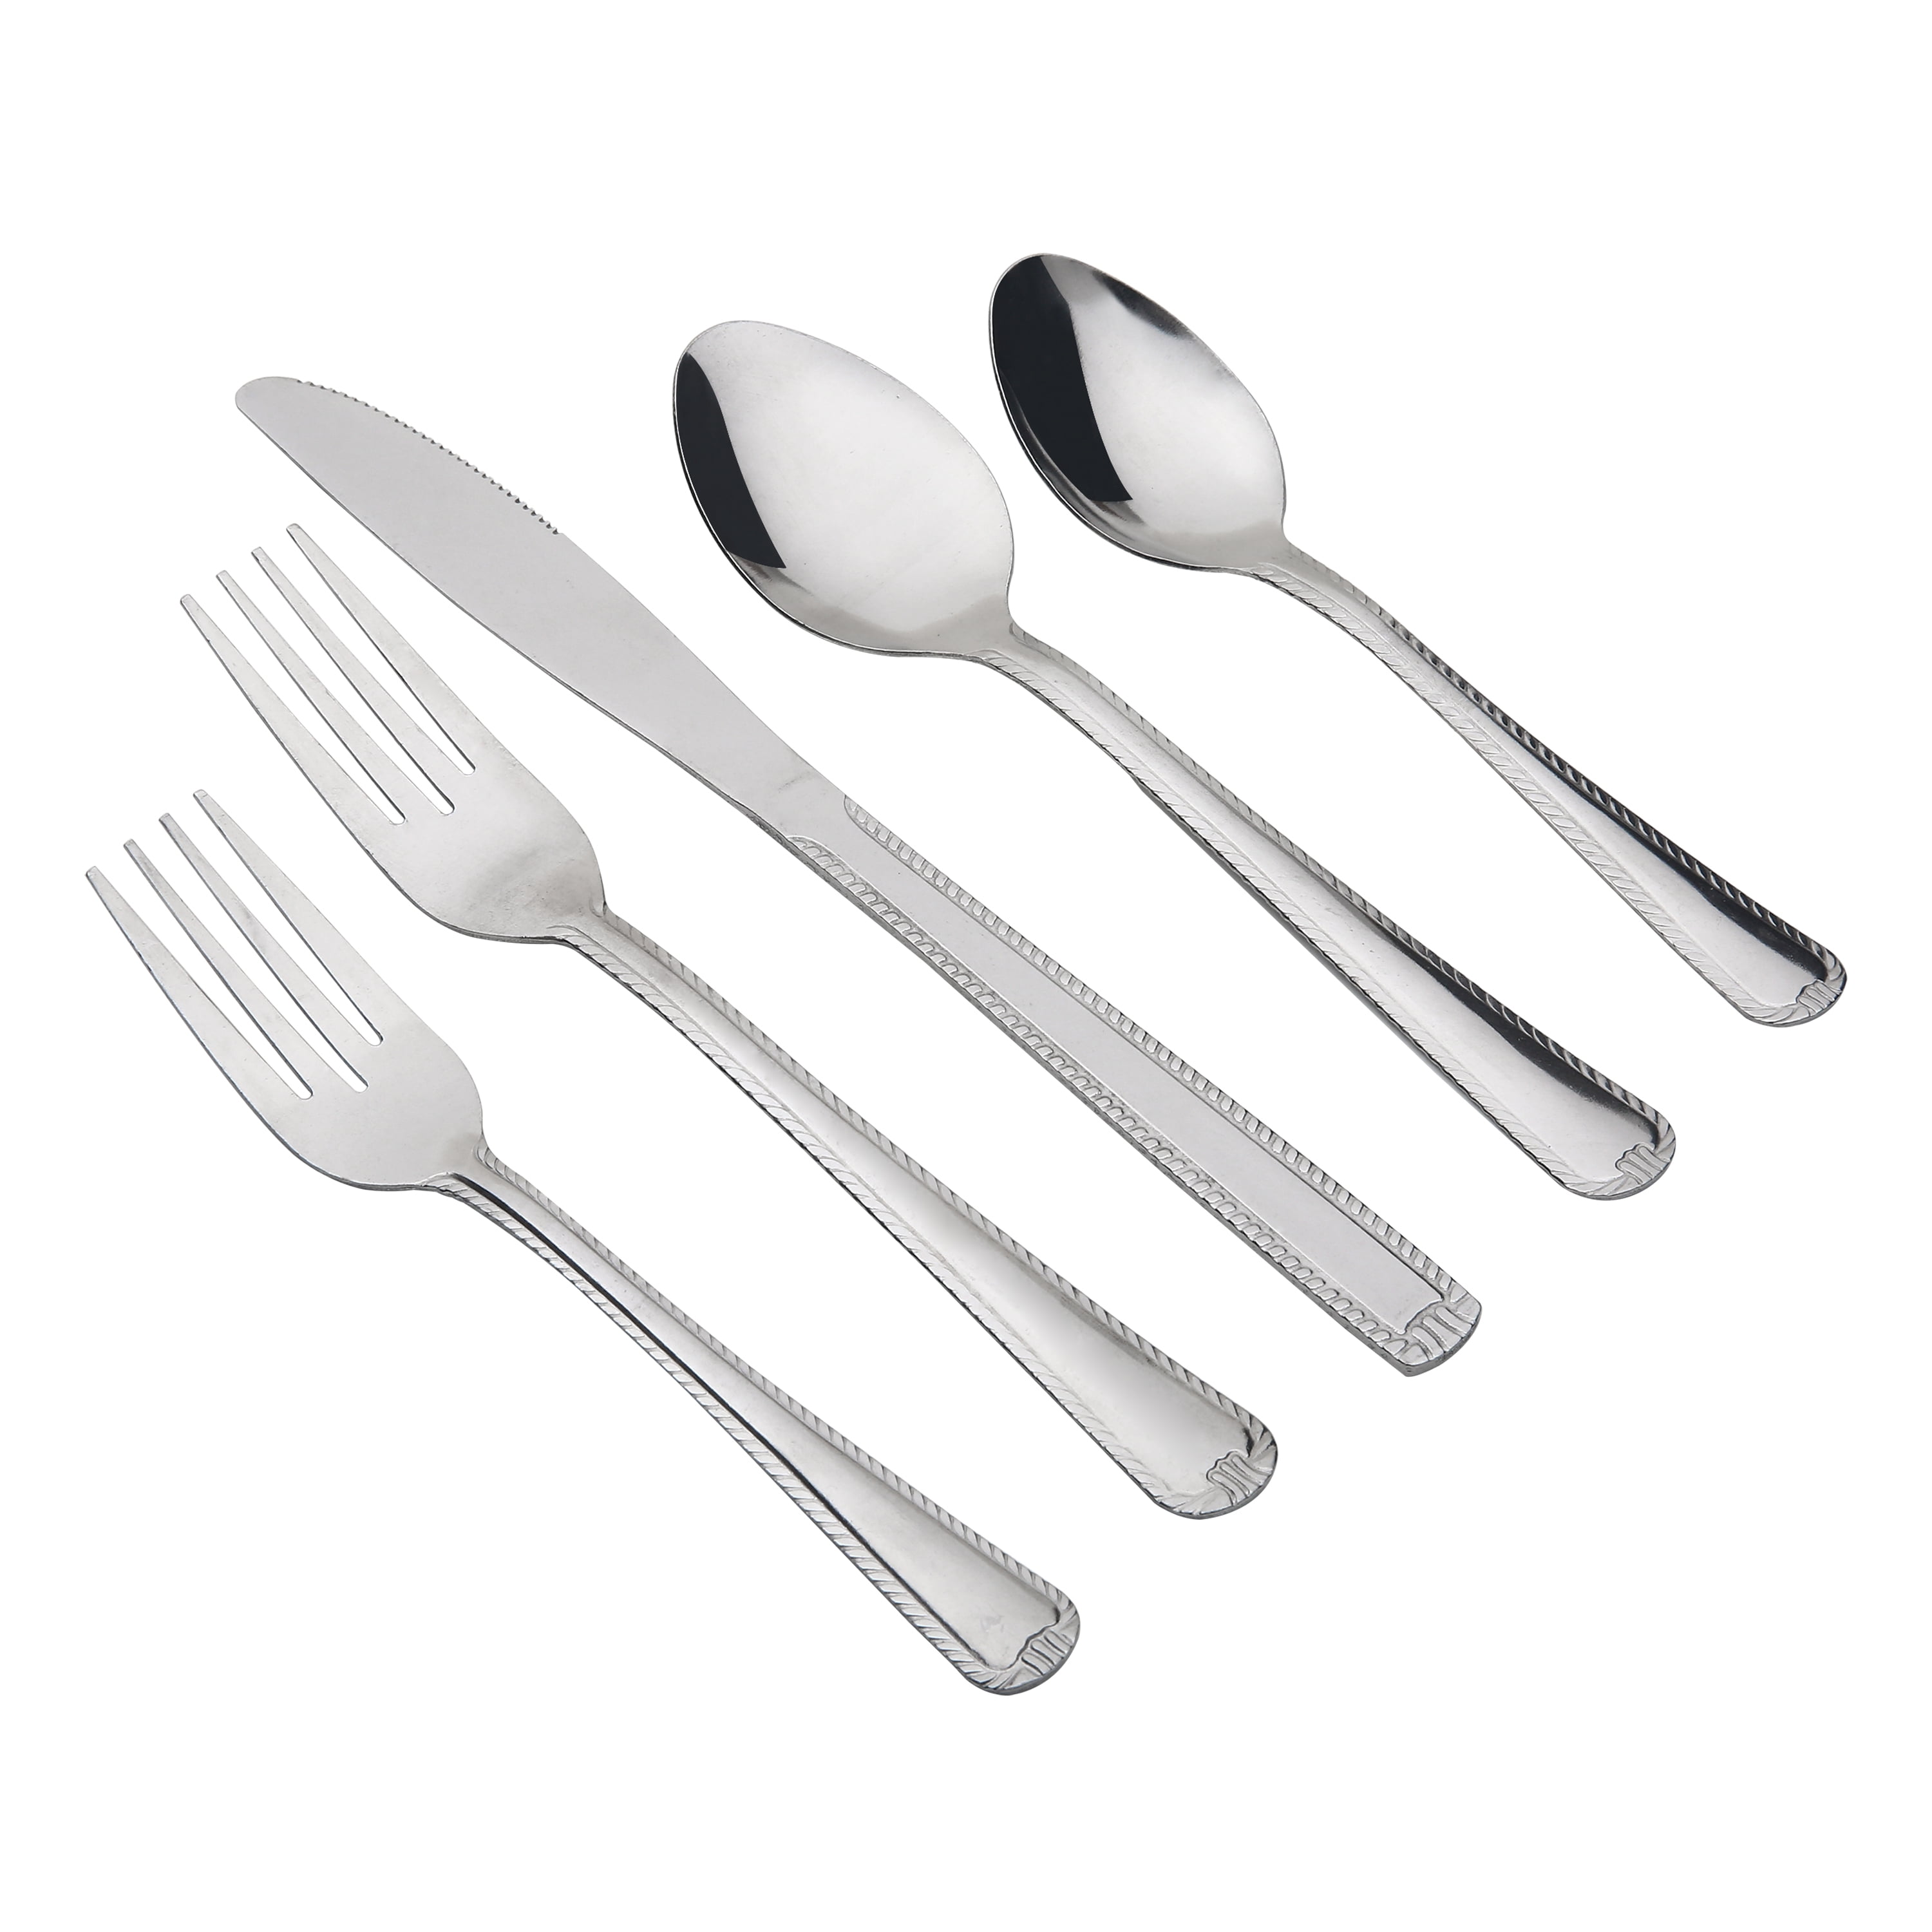 Mainstays 49 Piece Lace Stainless Steel Flatware Value Set with Tray Organizer, Silver